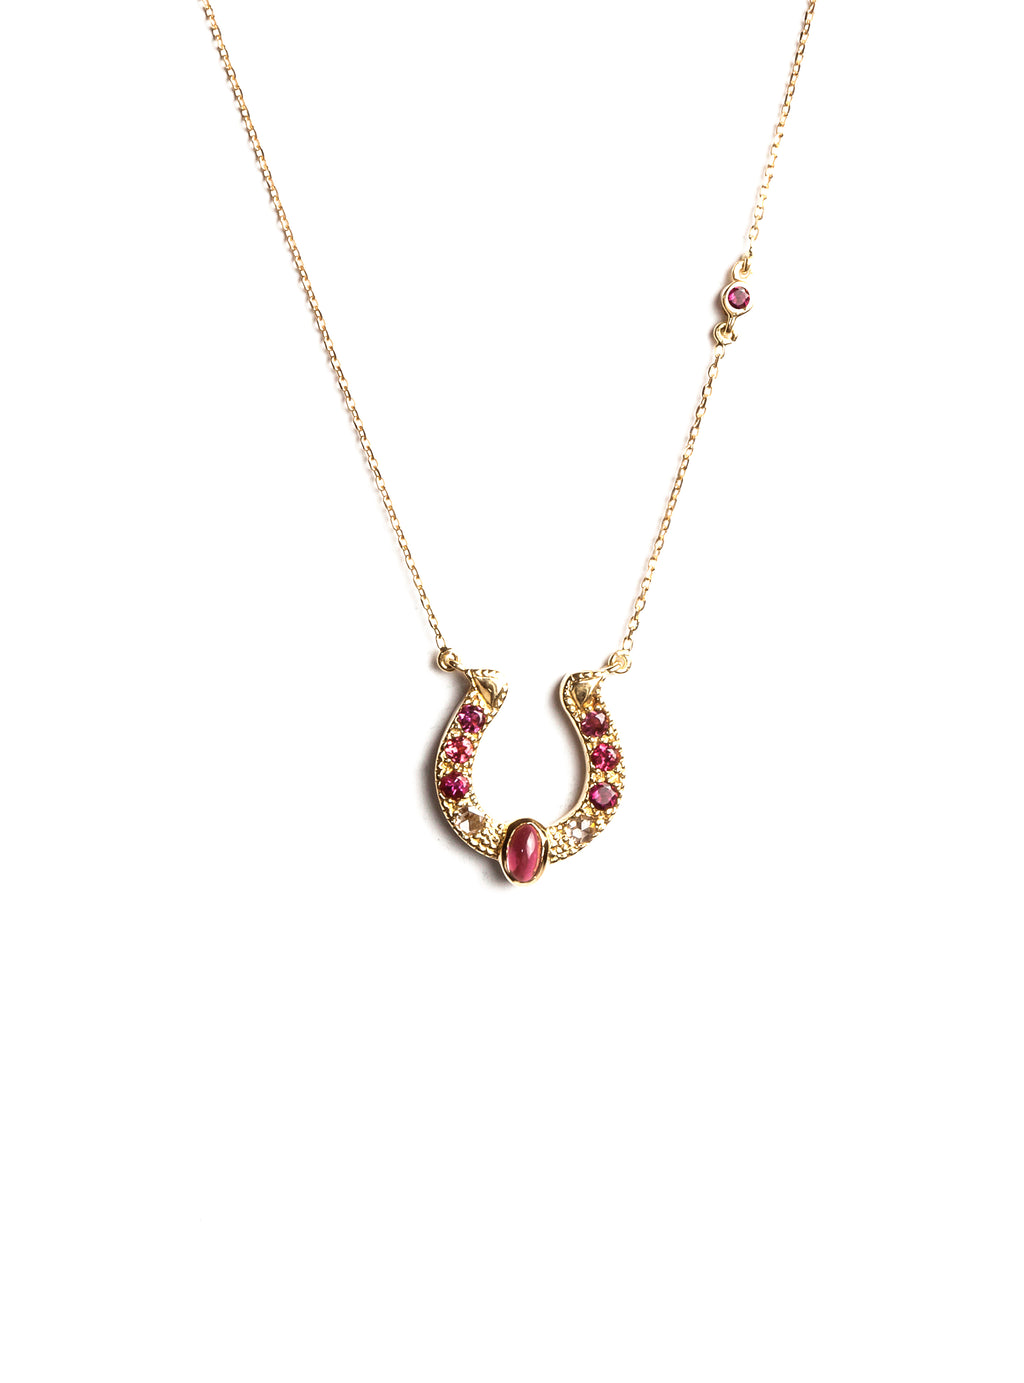 Horseshoe Necklace with Pink Tourmalines, Diamonds and Cabochon Accent